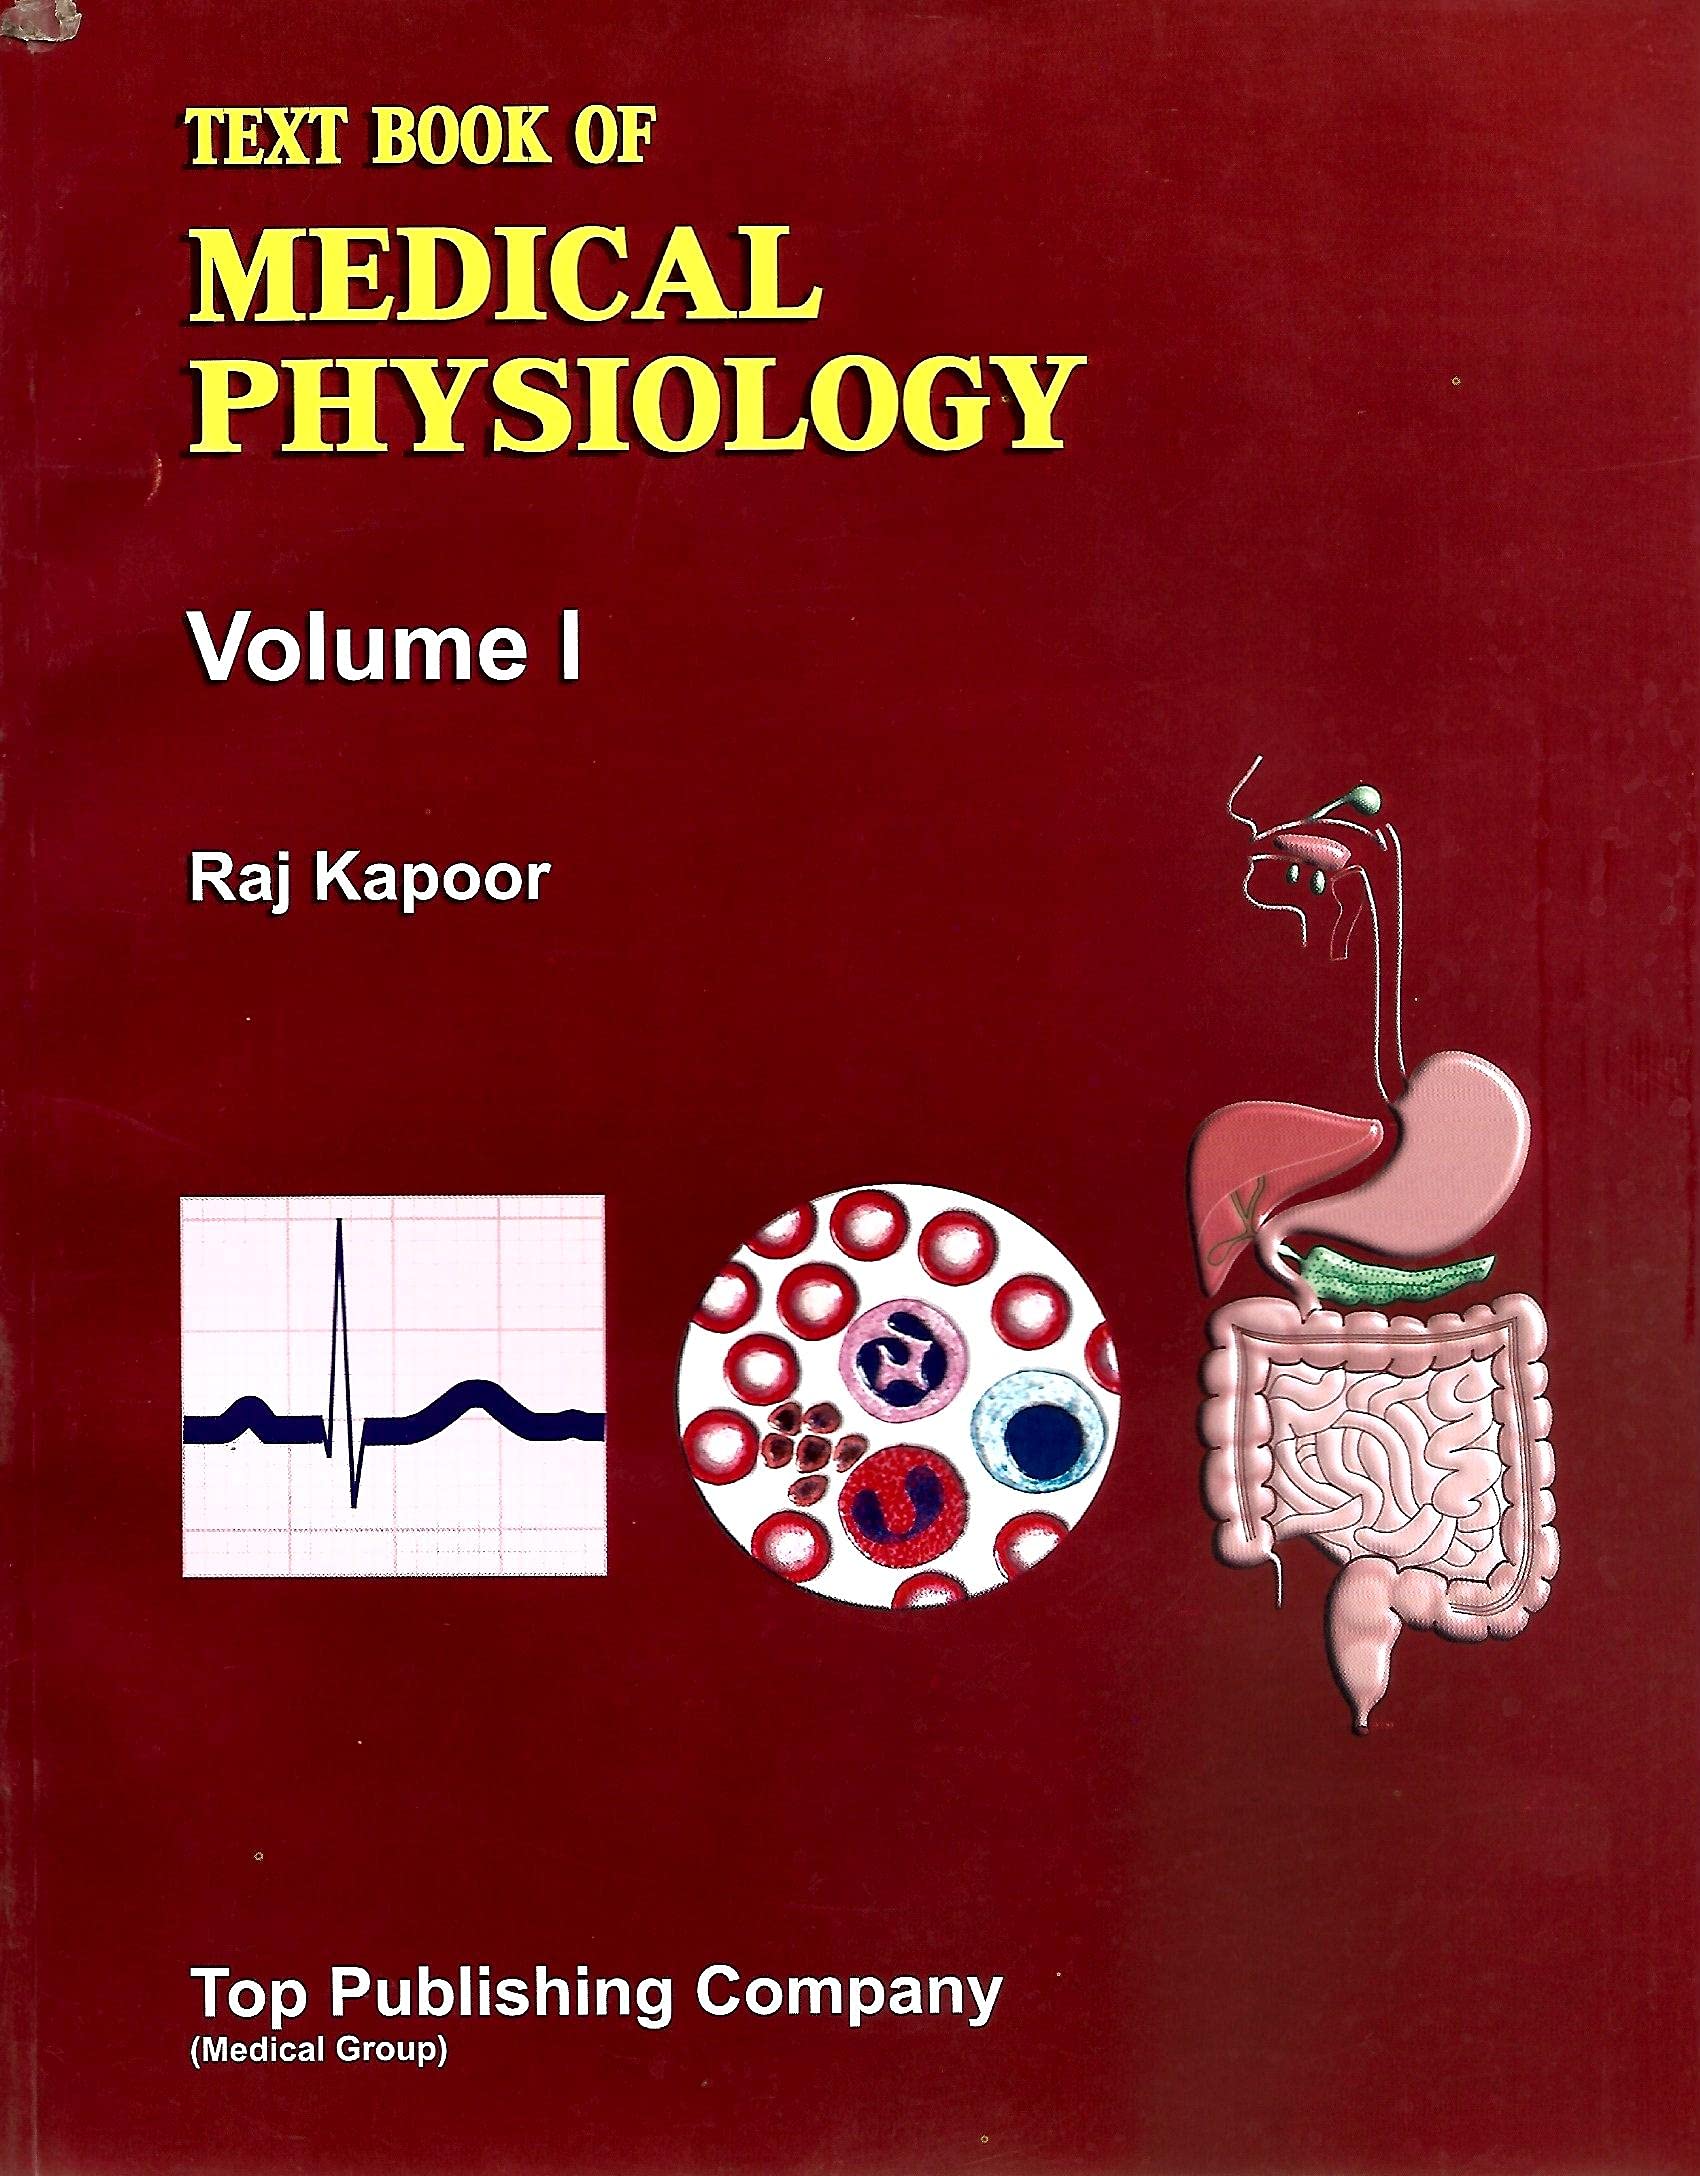 Latest Edition Text books of Medical physiology vol.1